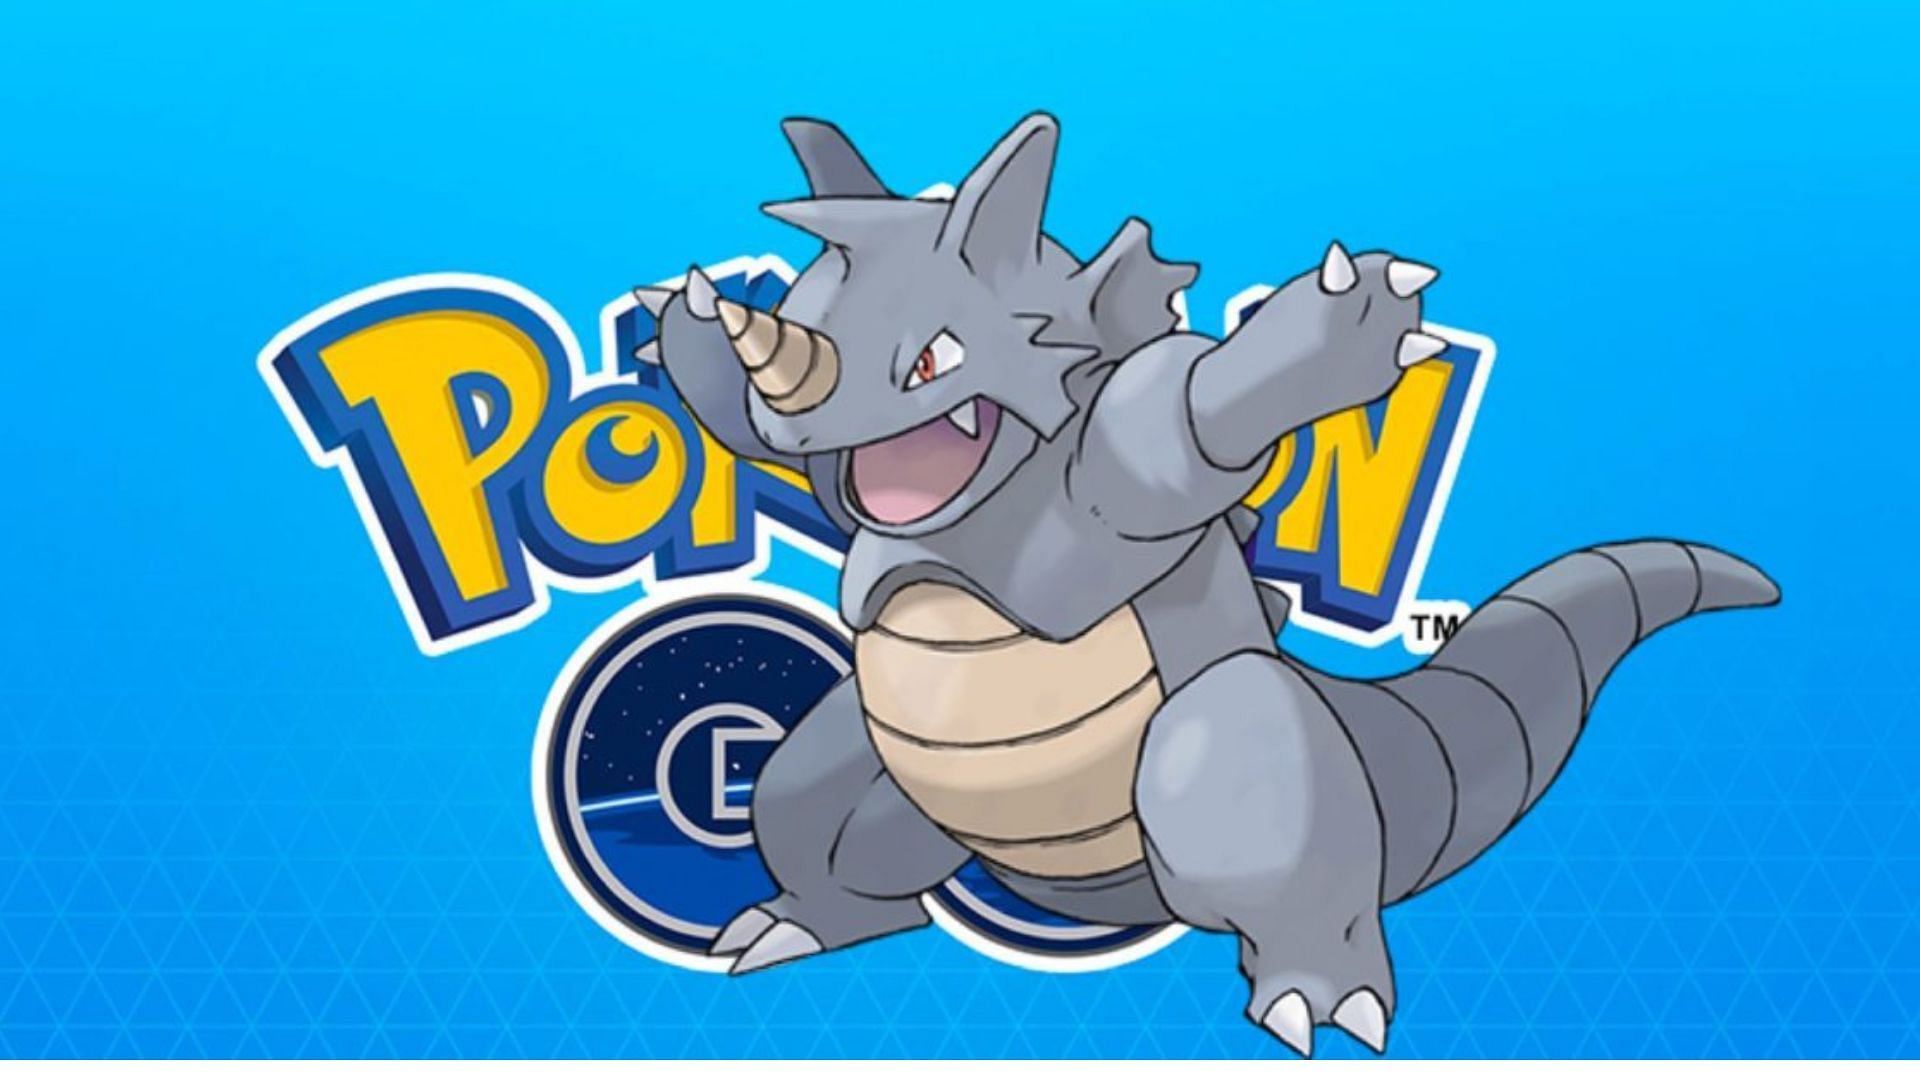 Rhydon has a Base Catch Rate of 5% (Image via Niantic)